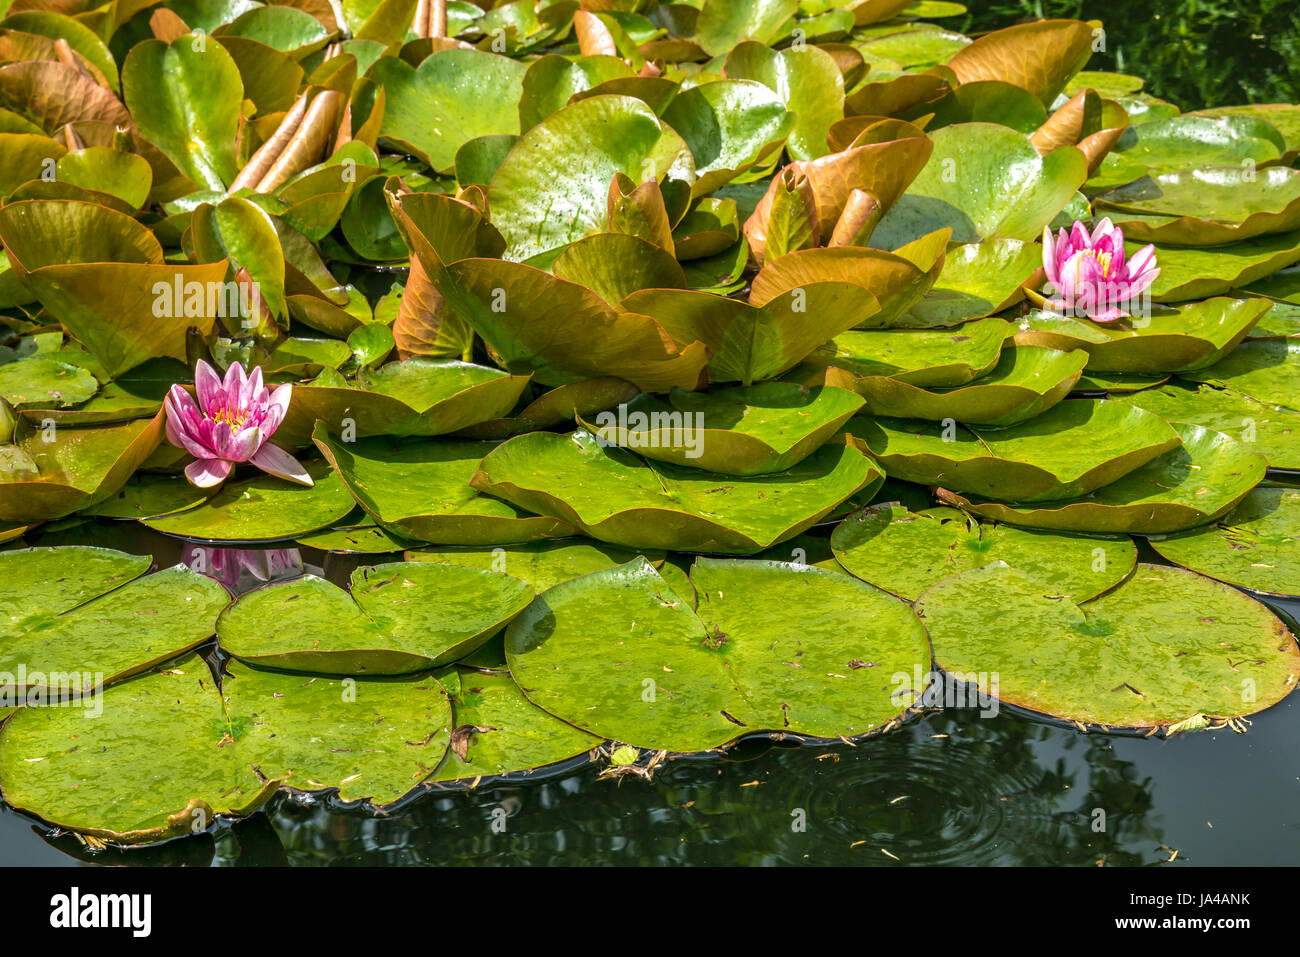 Garden pond with sun lit pink water lilies, Nymphaeaceae, and green lily pads, East Lothian, Scotland, UK Stock Photo